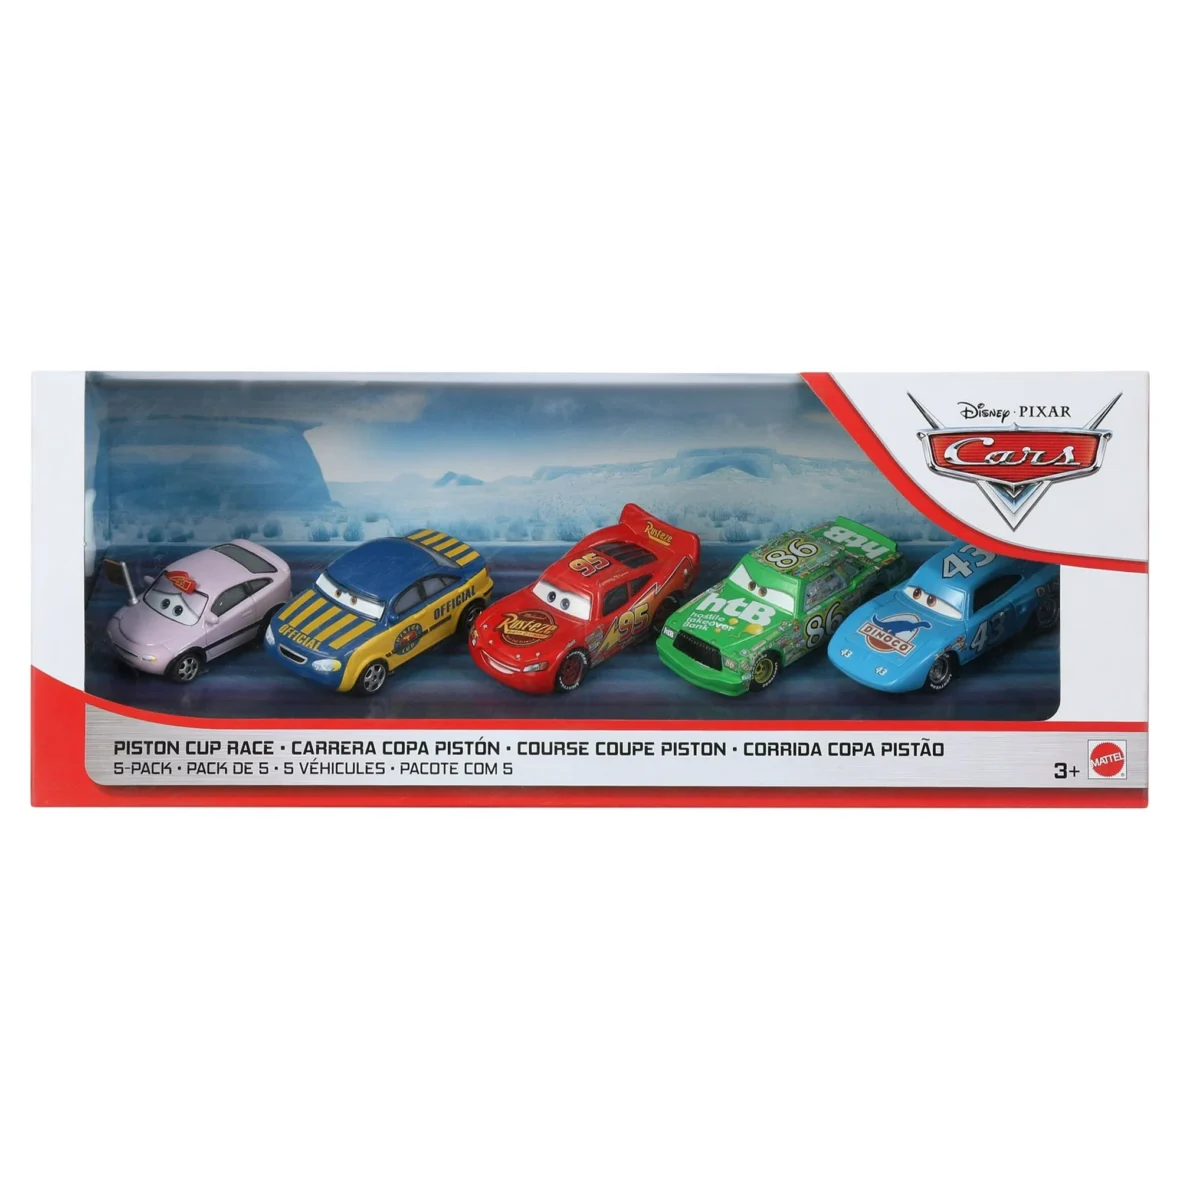 Disney Pixar Cars Piston Cup Race 5-Pack Toy Racers – STYLES MAY VARY